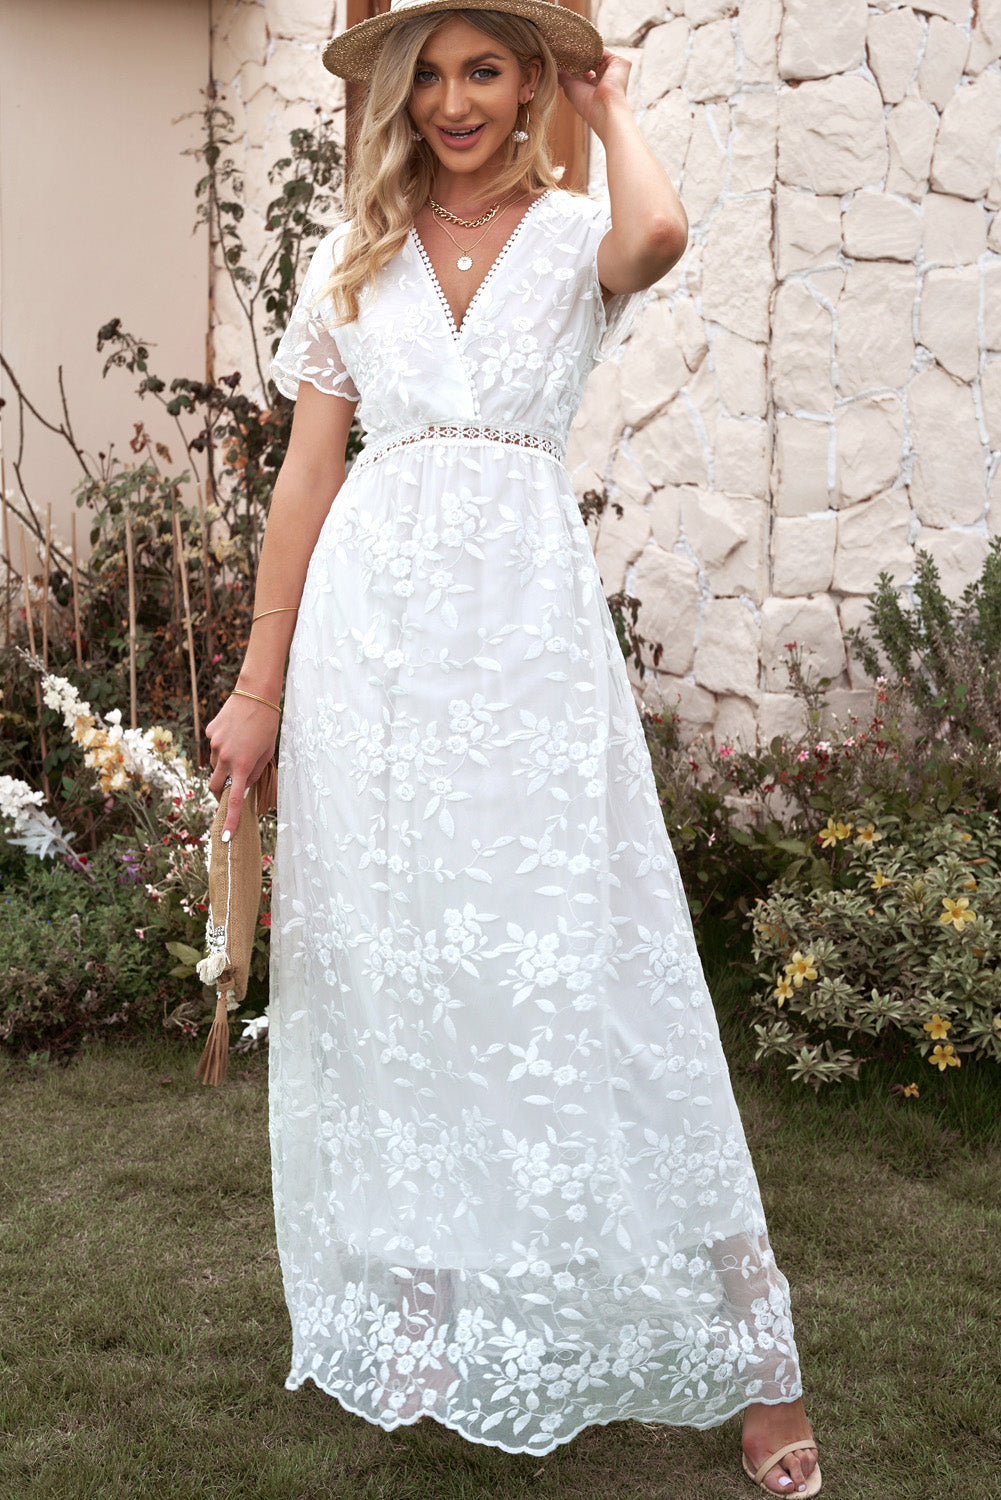 Beth's Favorite Embroidered Dress